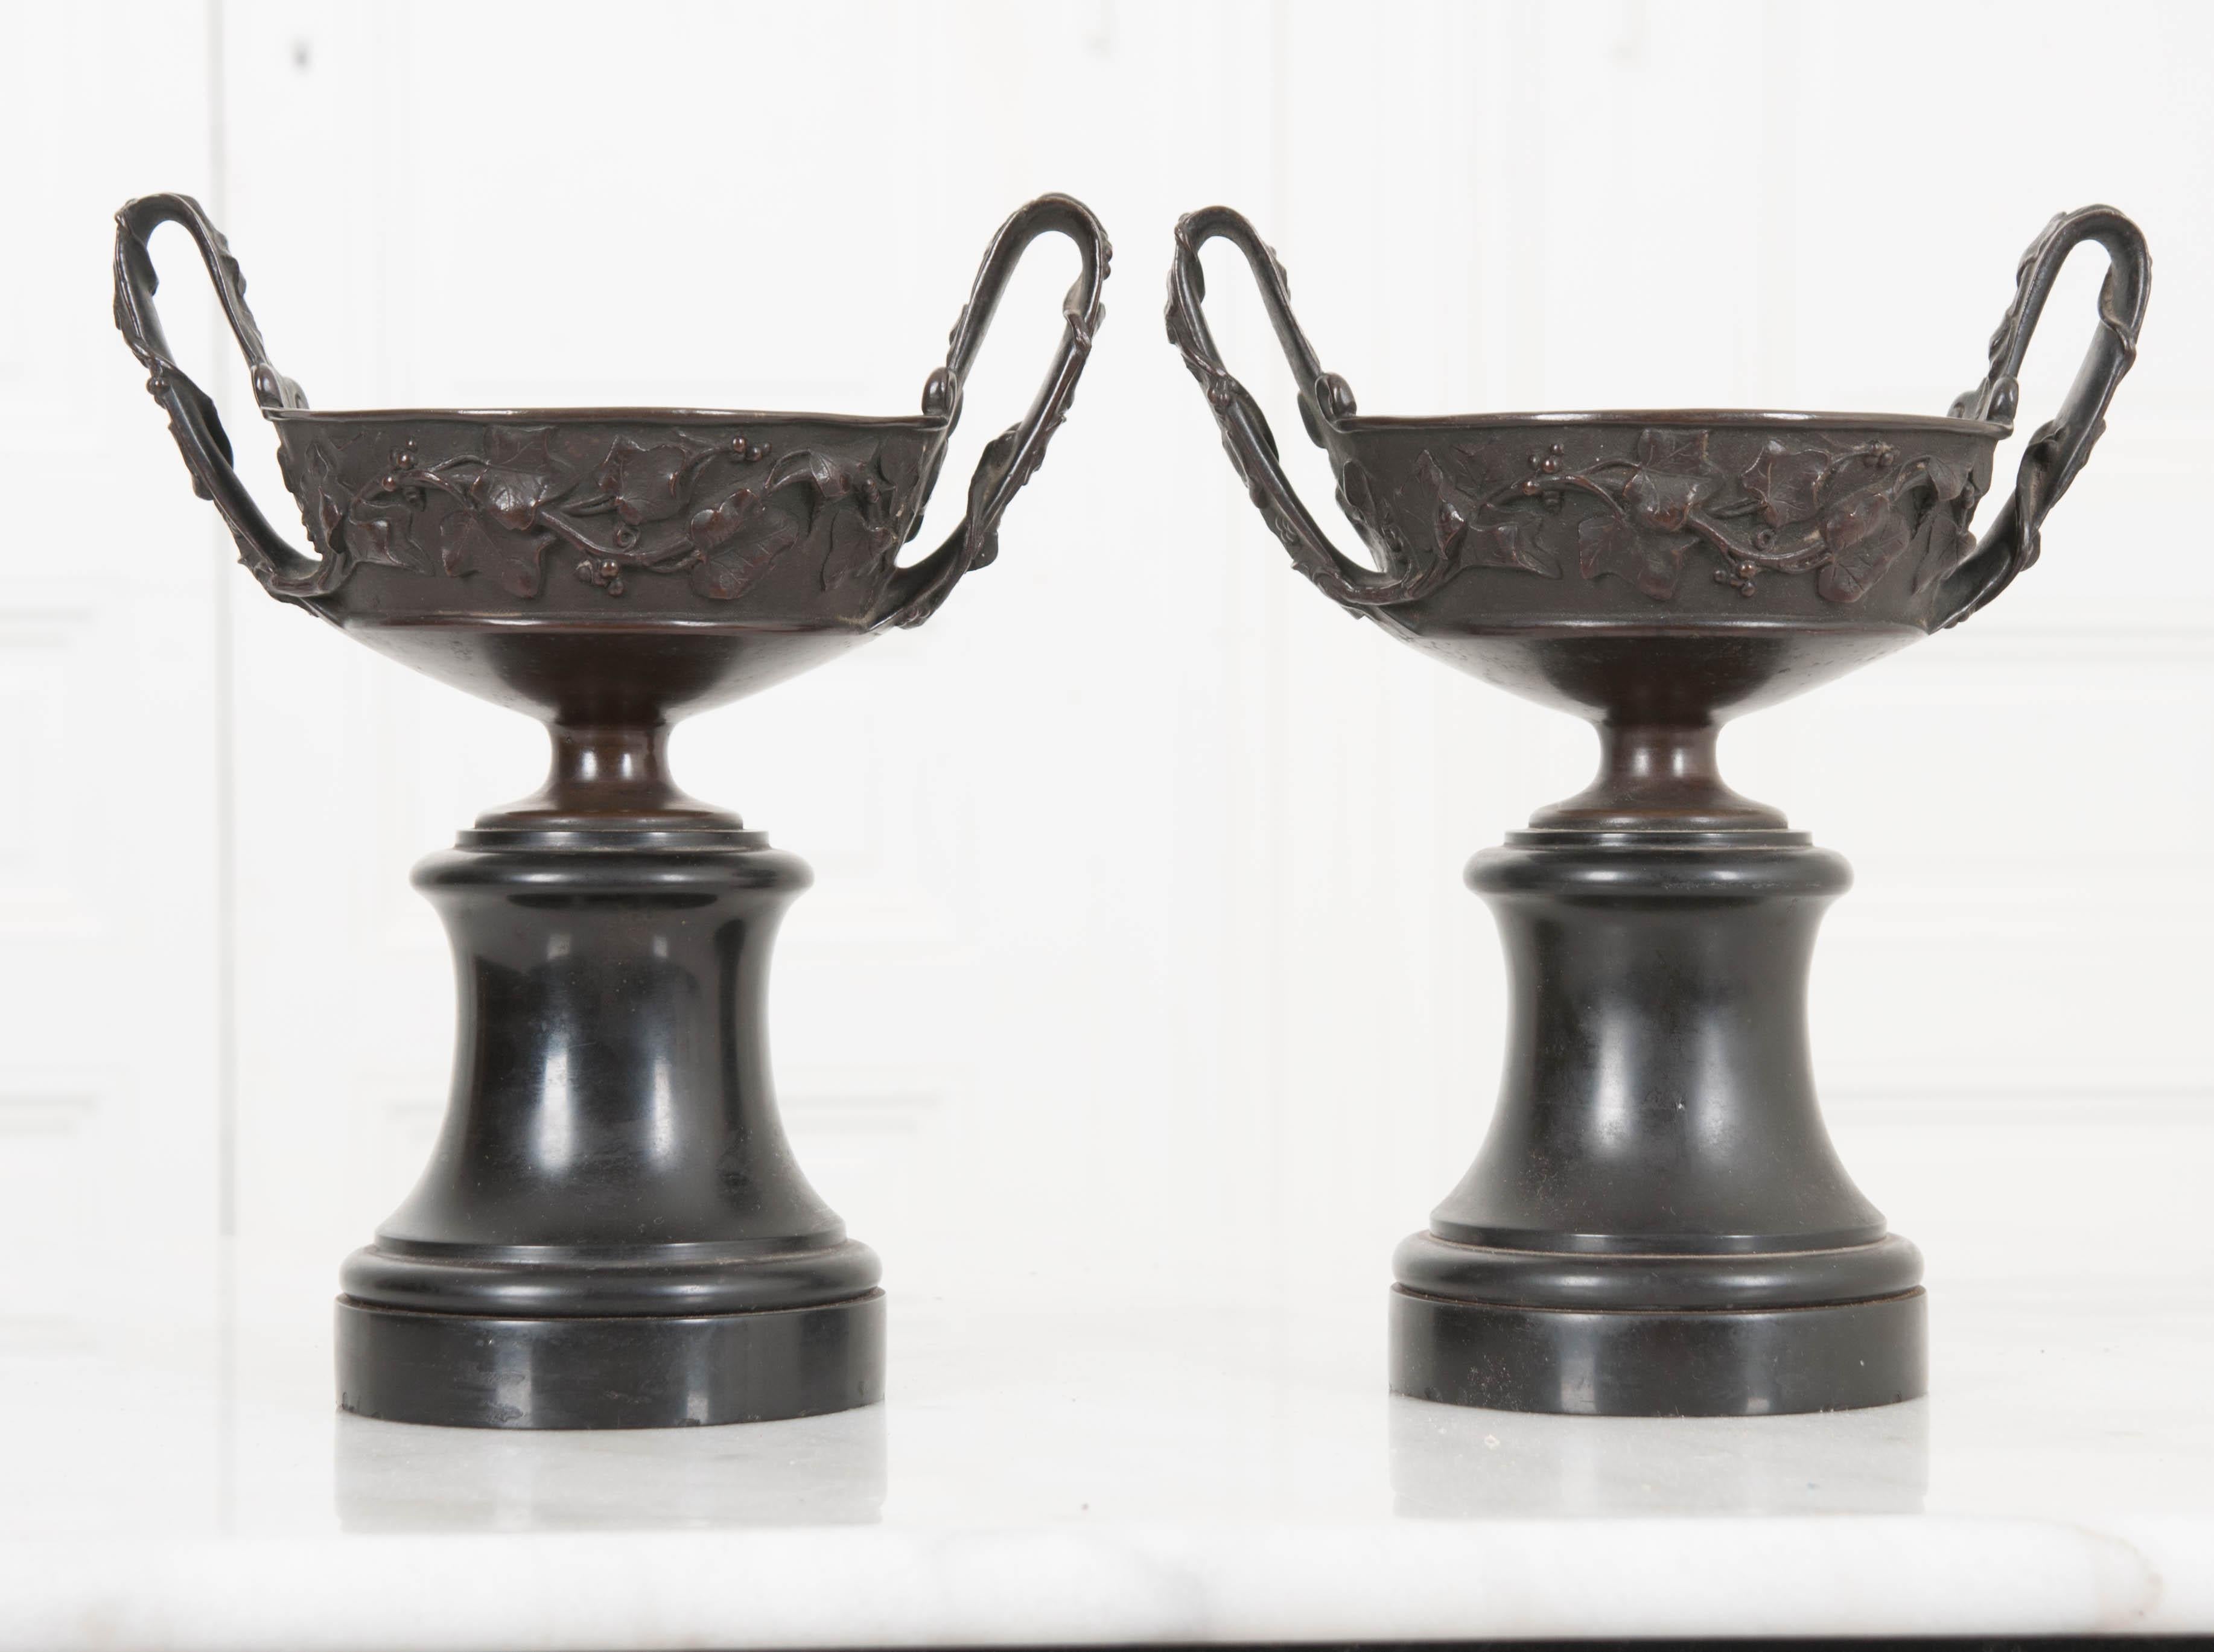 A lovely pair of bronze tazza-shaped urns from 19th century, France. The urns are made of cast bronze, and rest atop round, black marble bases. The bronze urns have been cast with a beautiful grape vine motif that extends around the bowl and up the